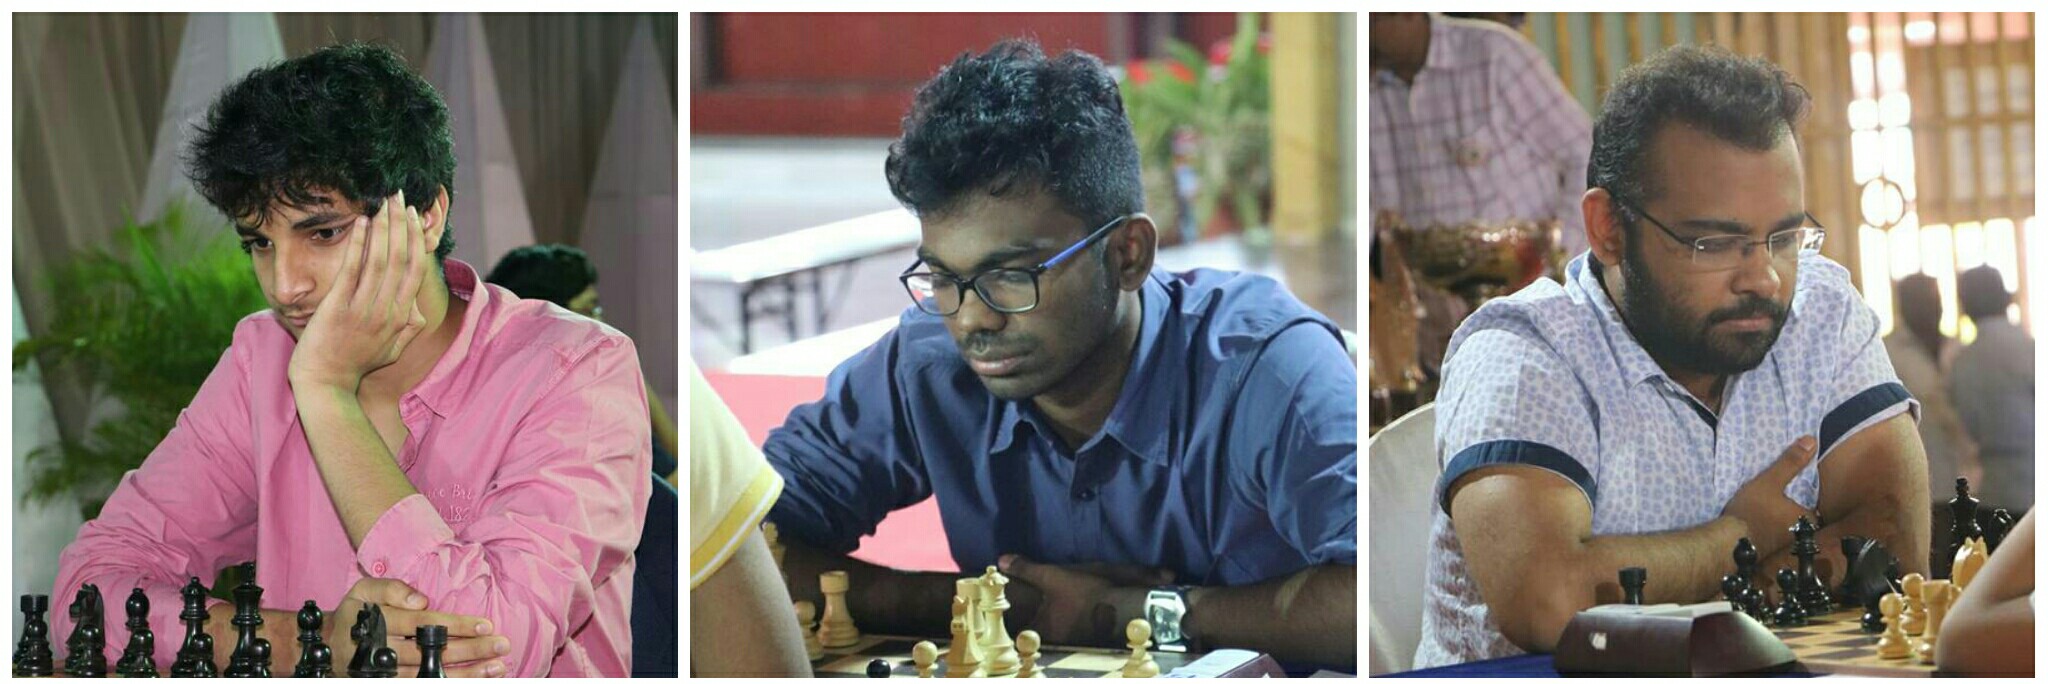 Indian chess prodigy Gukesh D crosses 2700 mark in live ratings